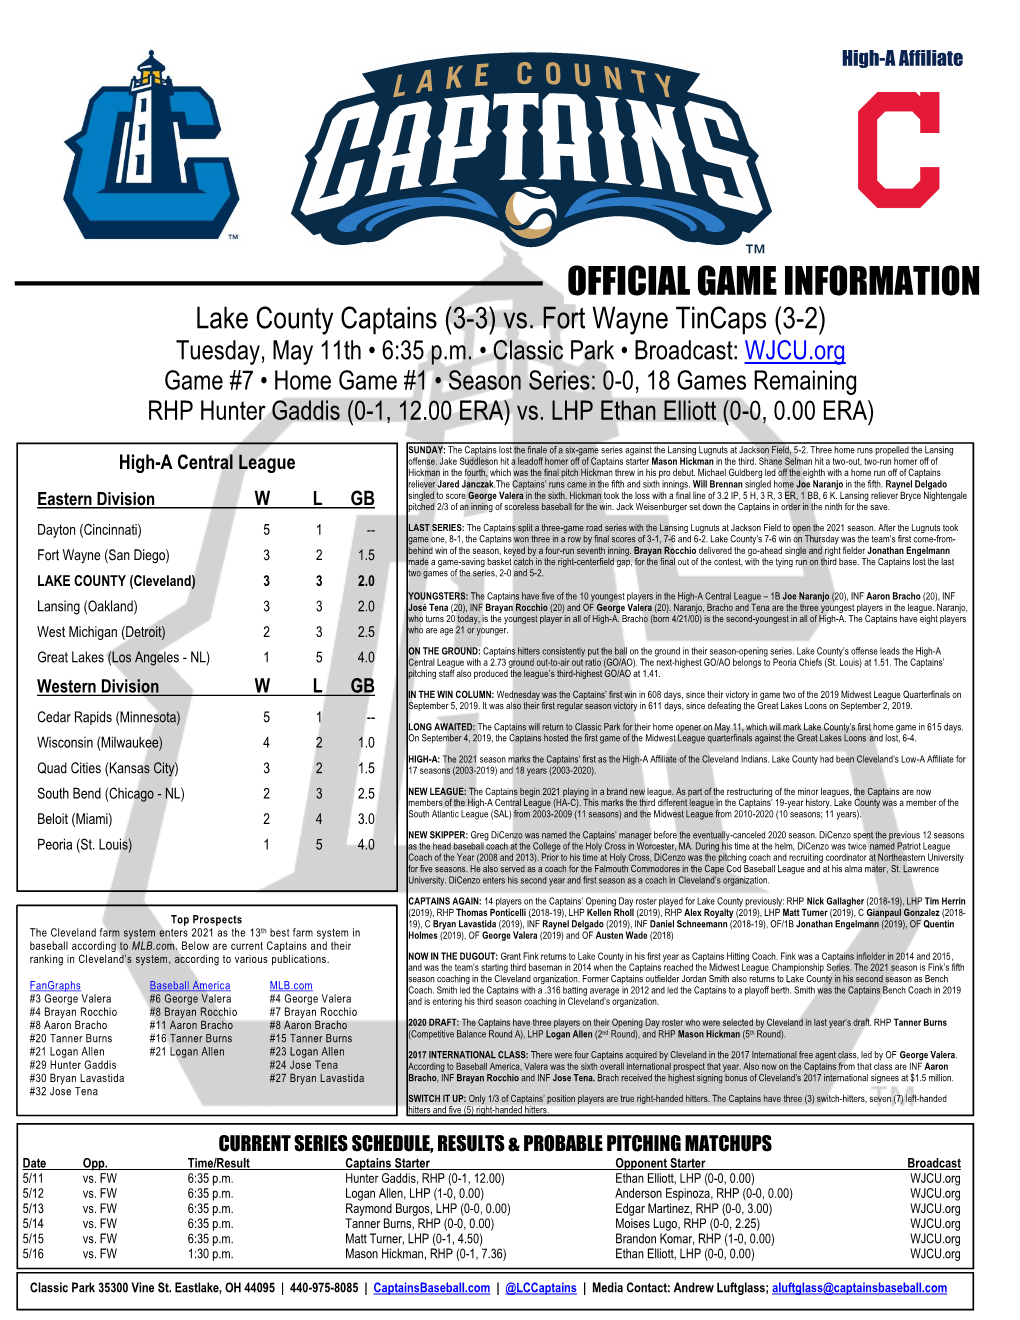 OFFICIAL GAME INFORMATION Lake County Captains (3-3) Vs